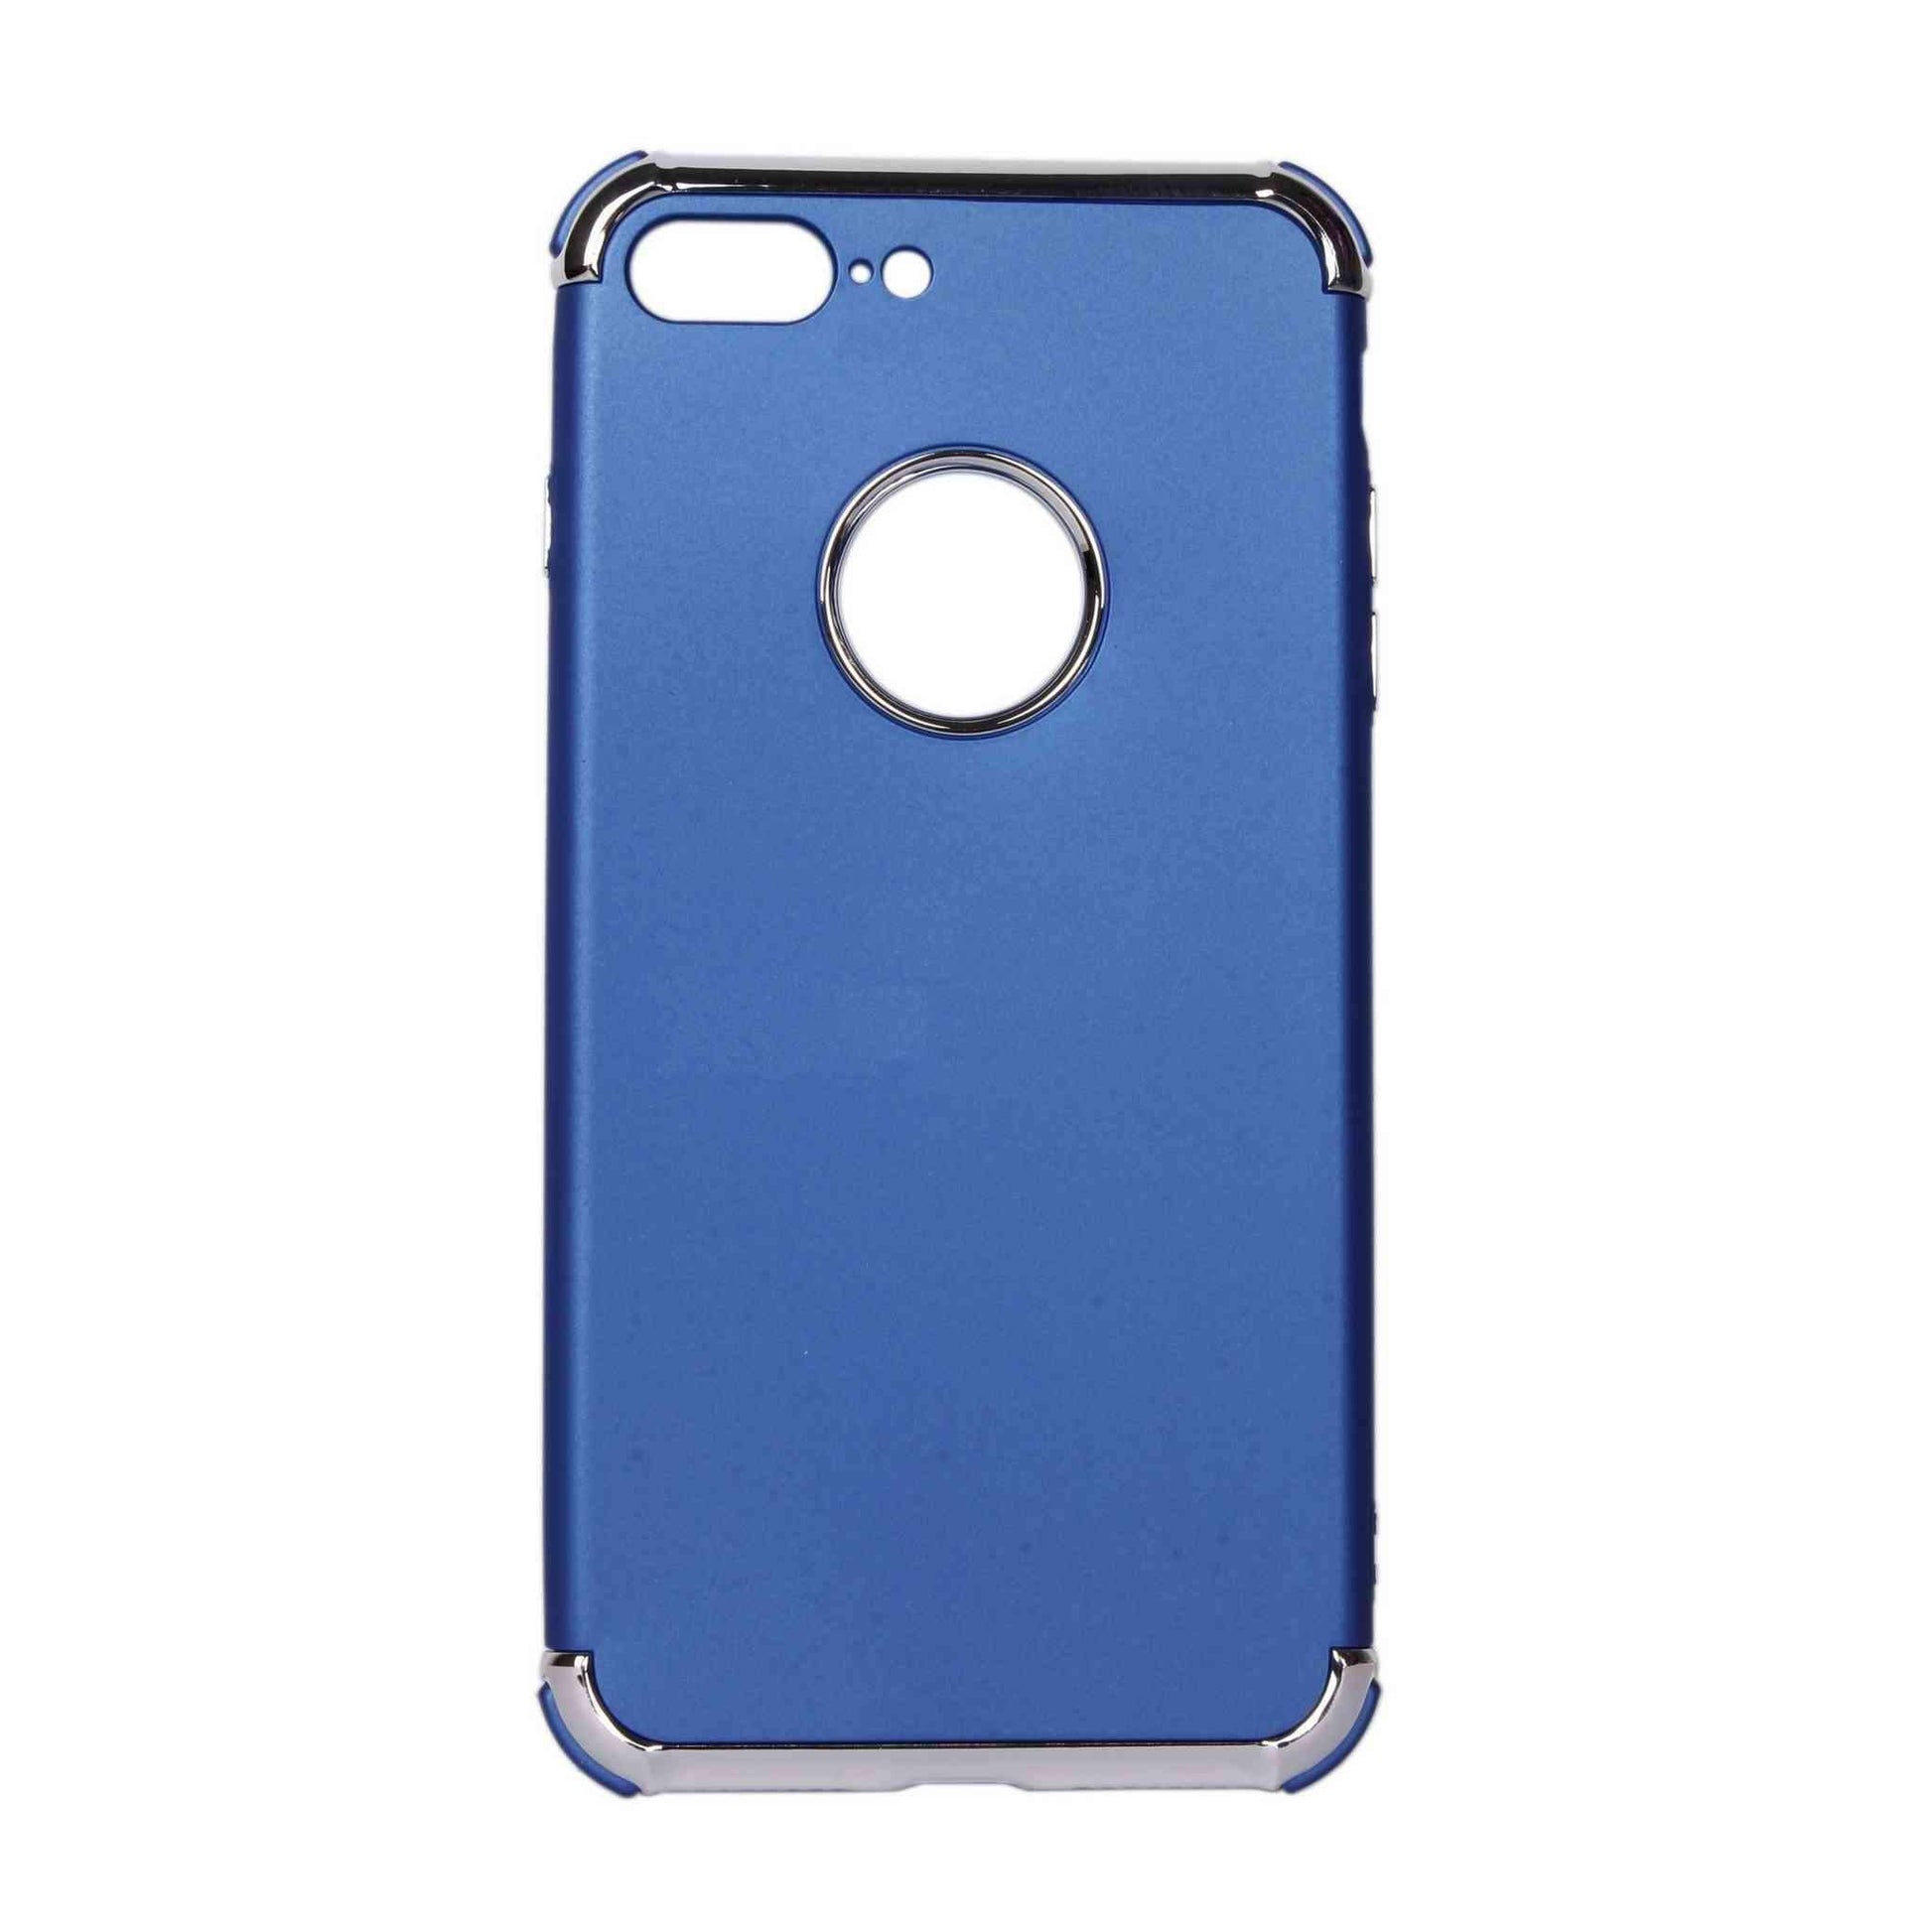 Indian Petals Polycarbonate Electro-plated Shock-proof Anti-scratch Protective Mobile Back Case Cover for Apple iPhone 7 Plus, Blue - Indian Petals